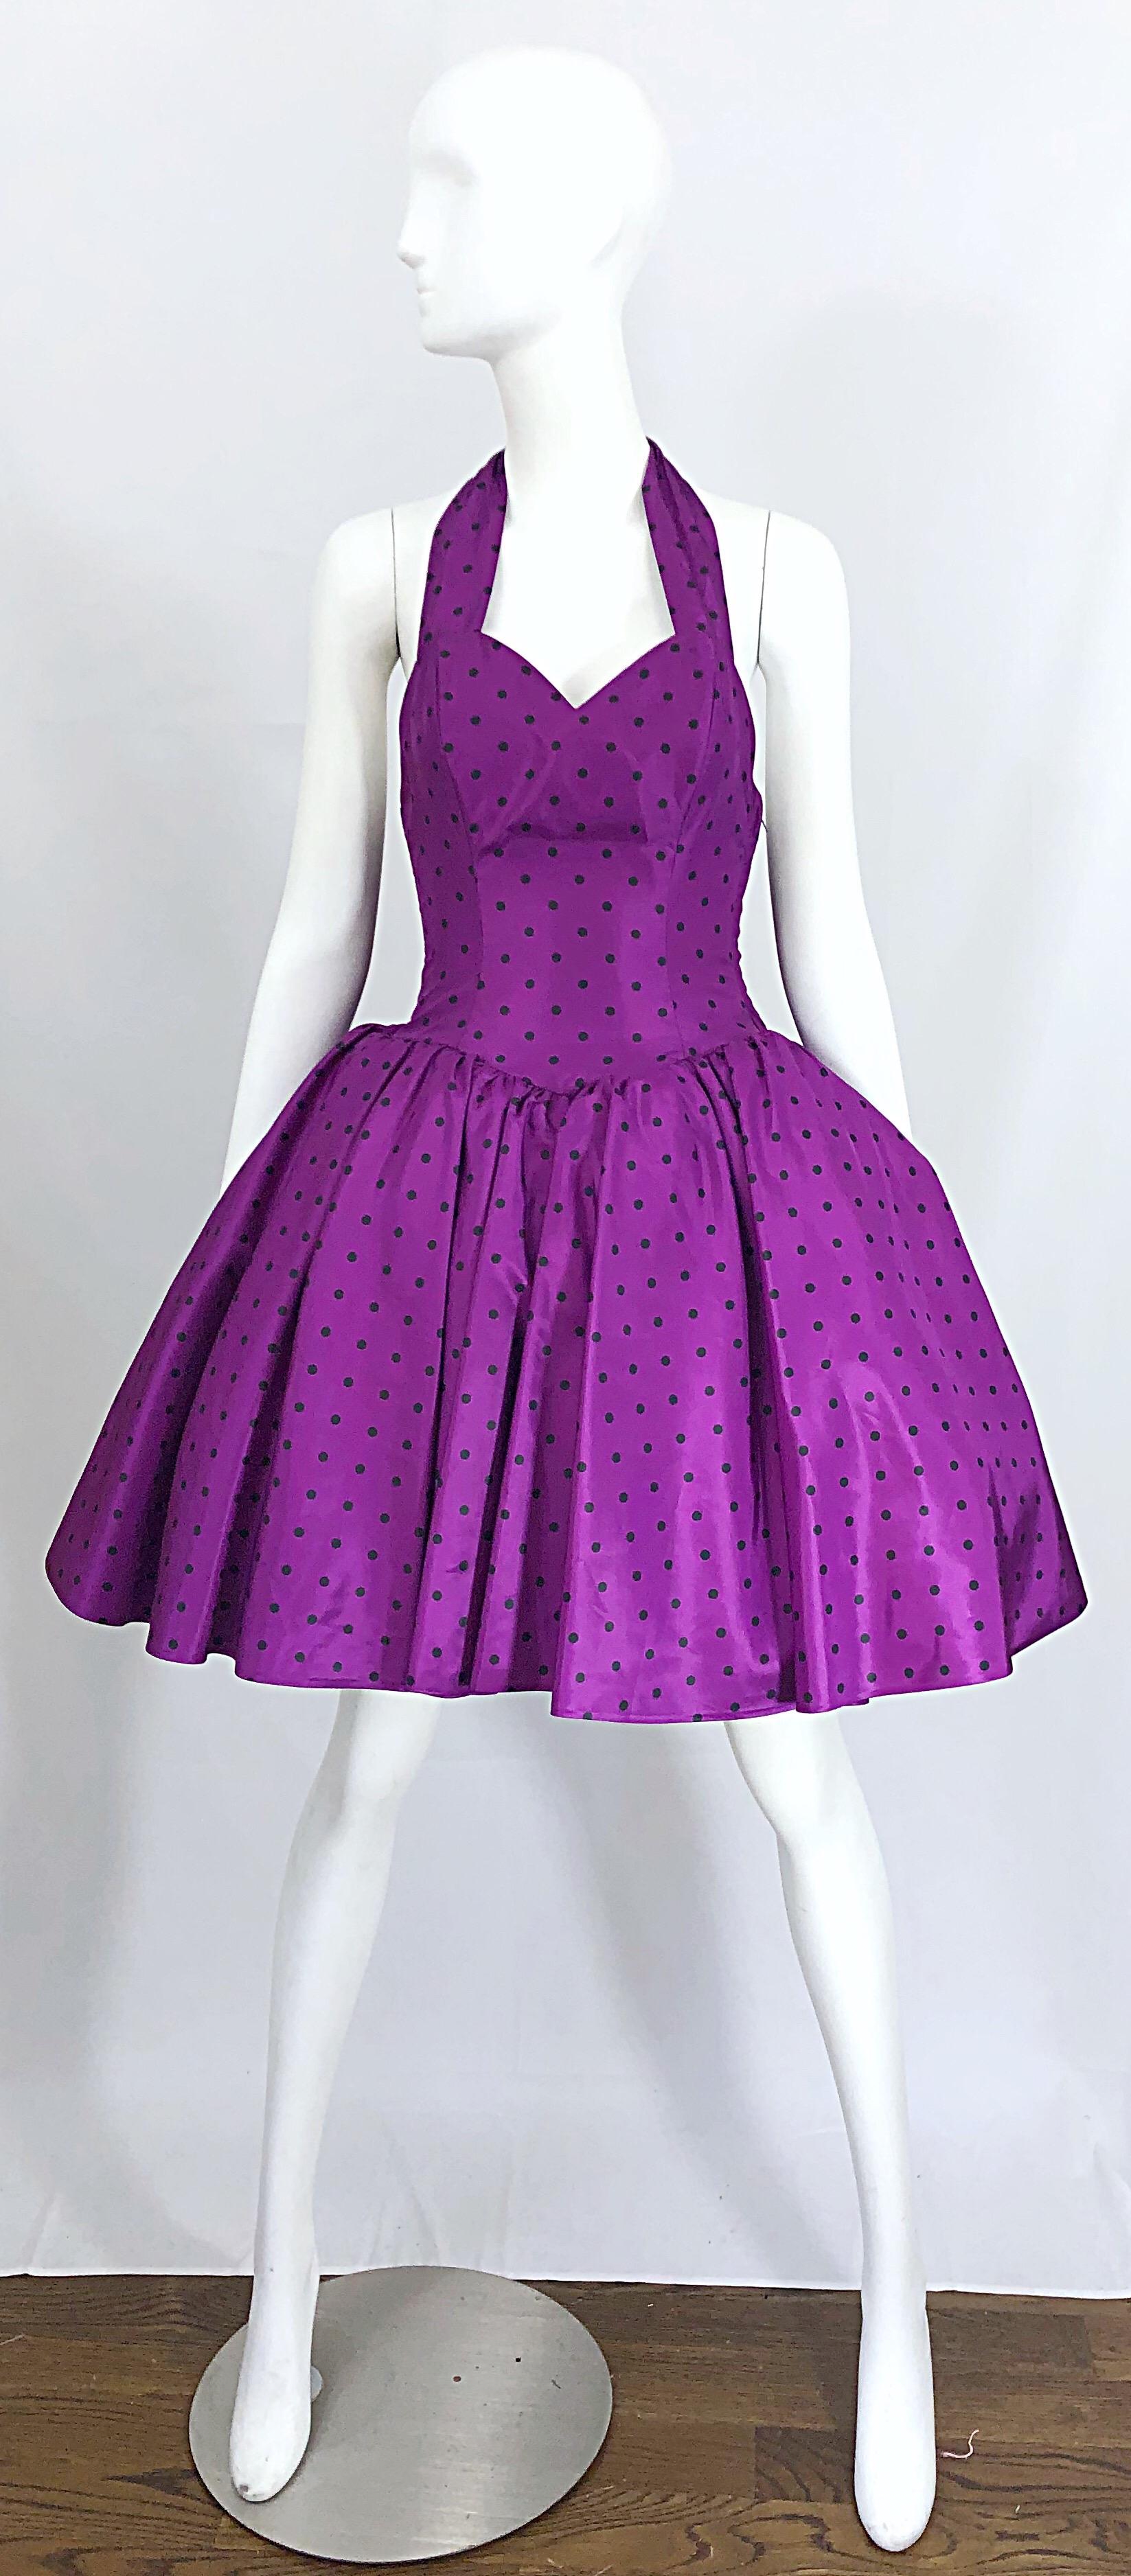 Rare and fabulous 1980s WILLIWEAR / WILLI SMITH purple and green polka dot taffeta mini halter dress! Features a fitted boned bodice with long sashes that tie at the back neck. Hidden zipper up the side with hook-and-eye closure. Attached violet